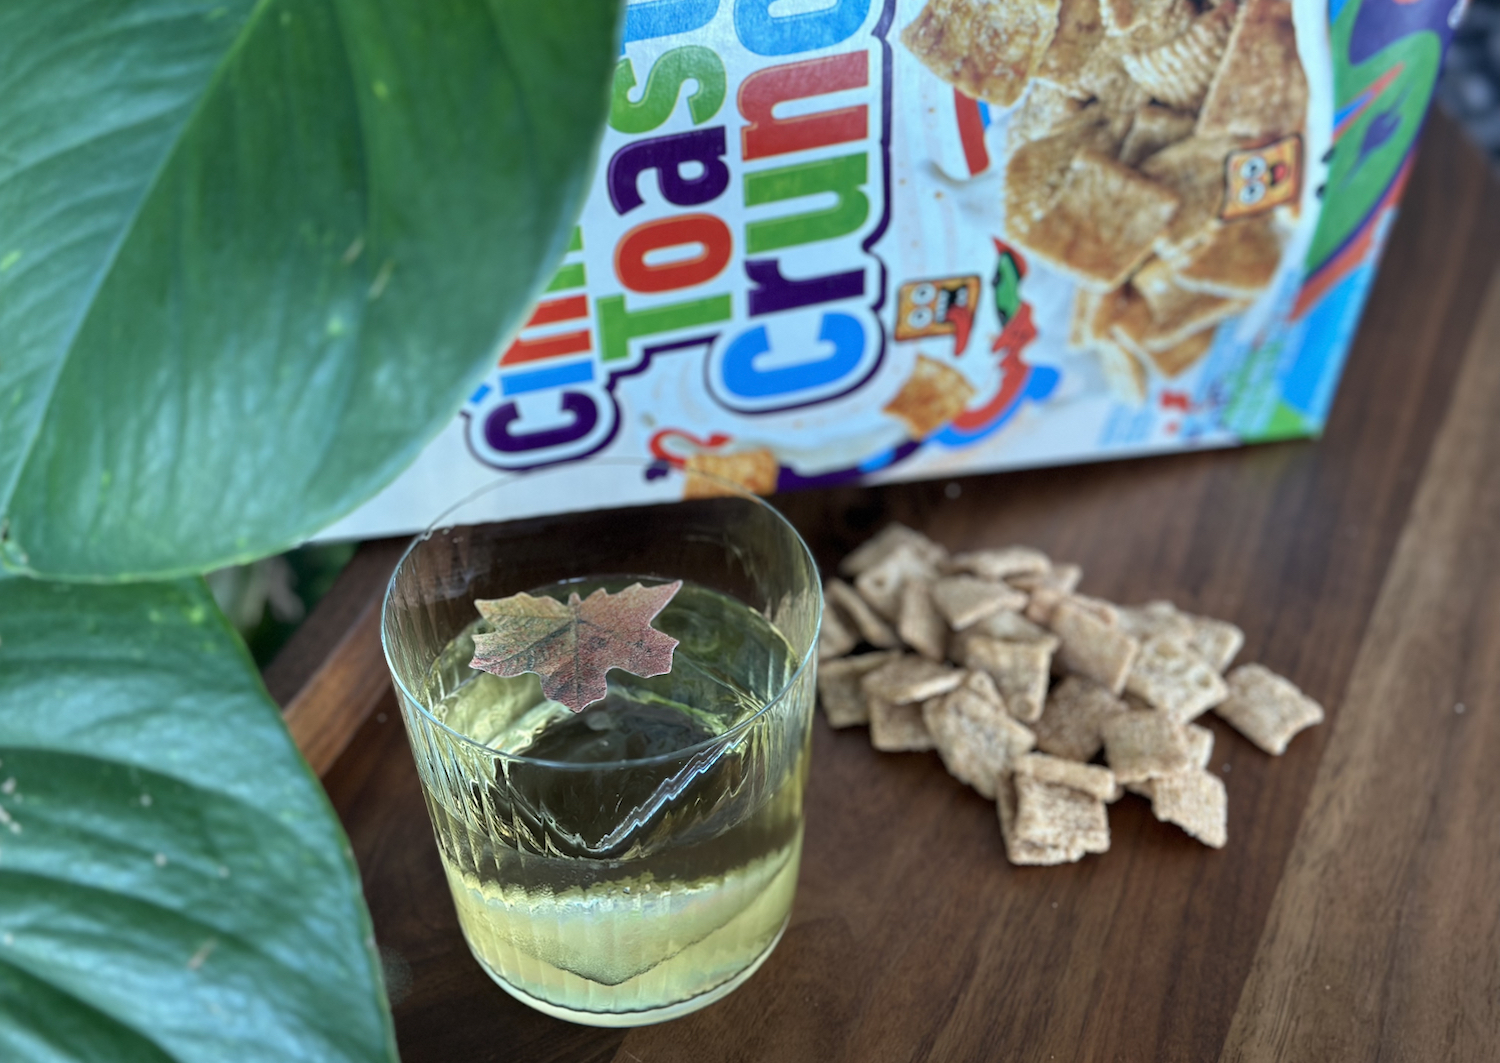 Lowball cocktail glass with clearish-green liquid and garnished with a brown leaf in front of a box of Cinnamon TOast Crunch and next to a plant. 